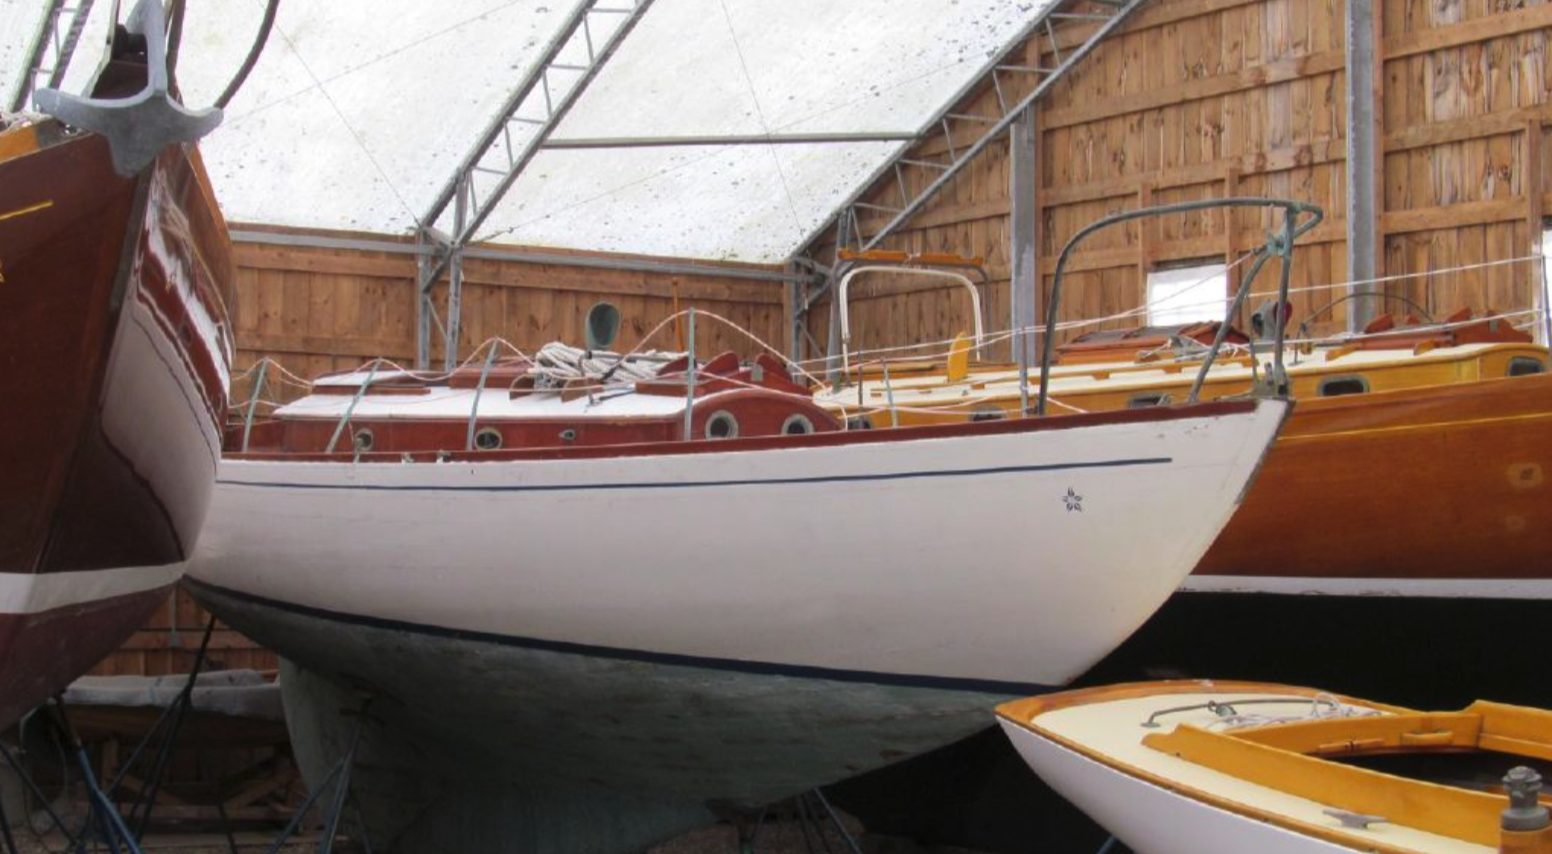 1951 Concordia 39 AUREOLE. Stored inside at Concordia Company in South Dartmouth, MA. More information: